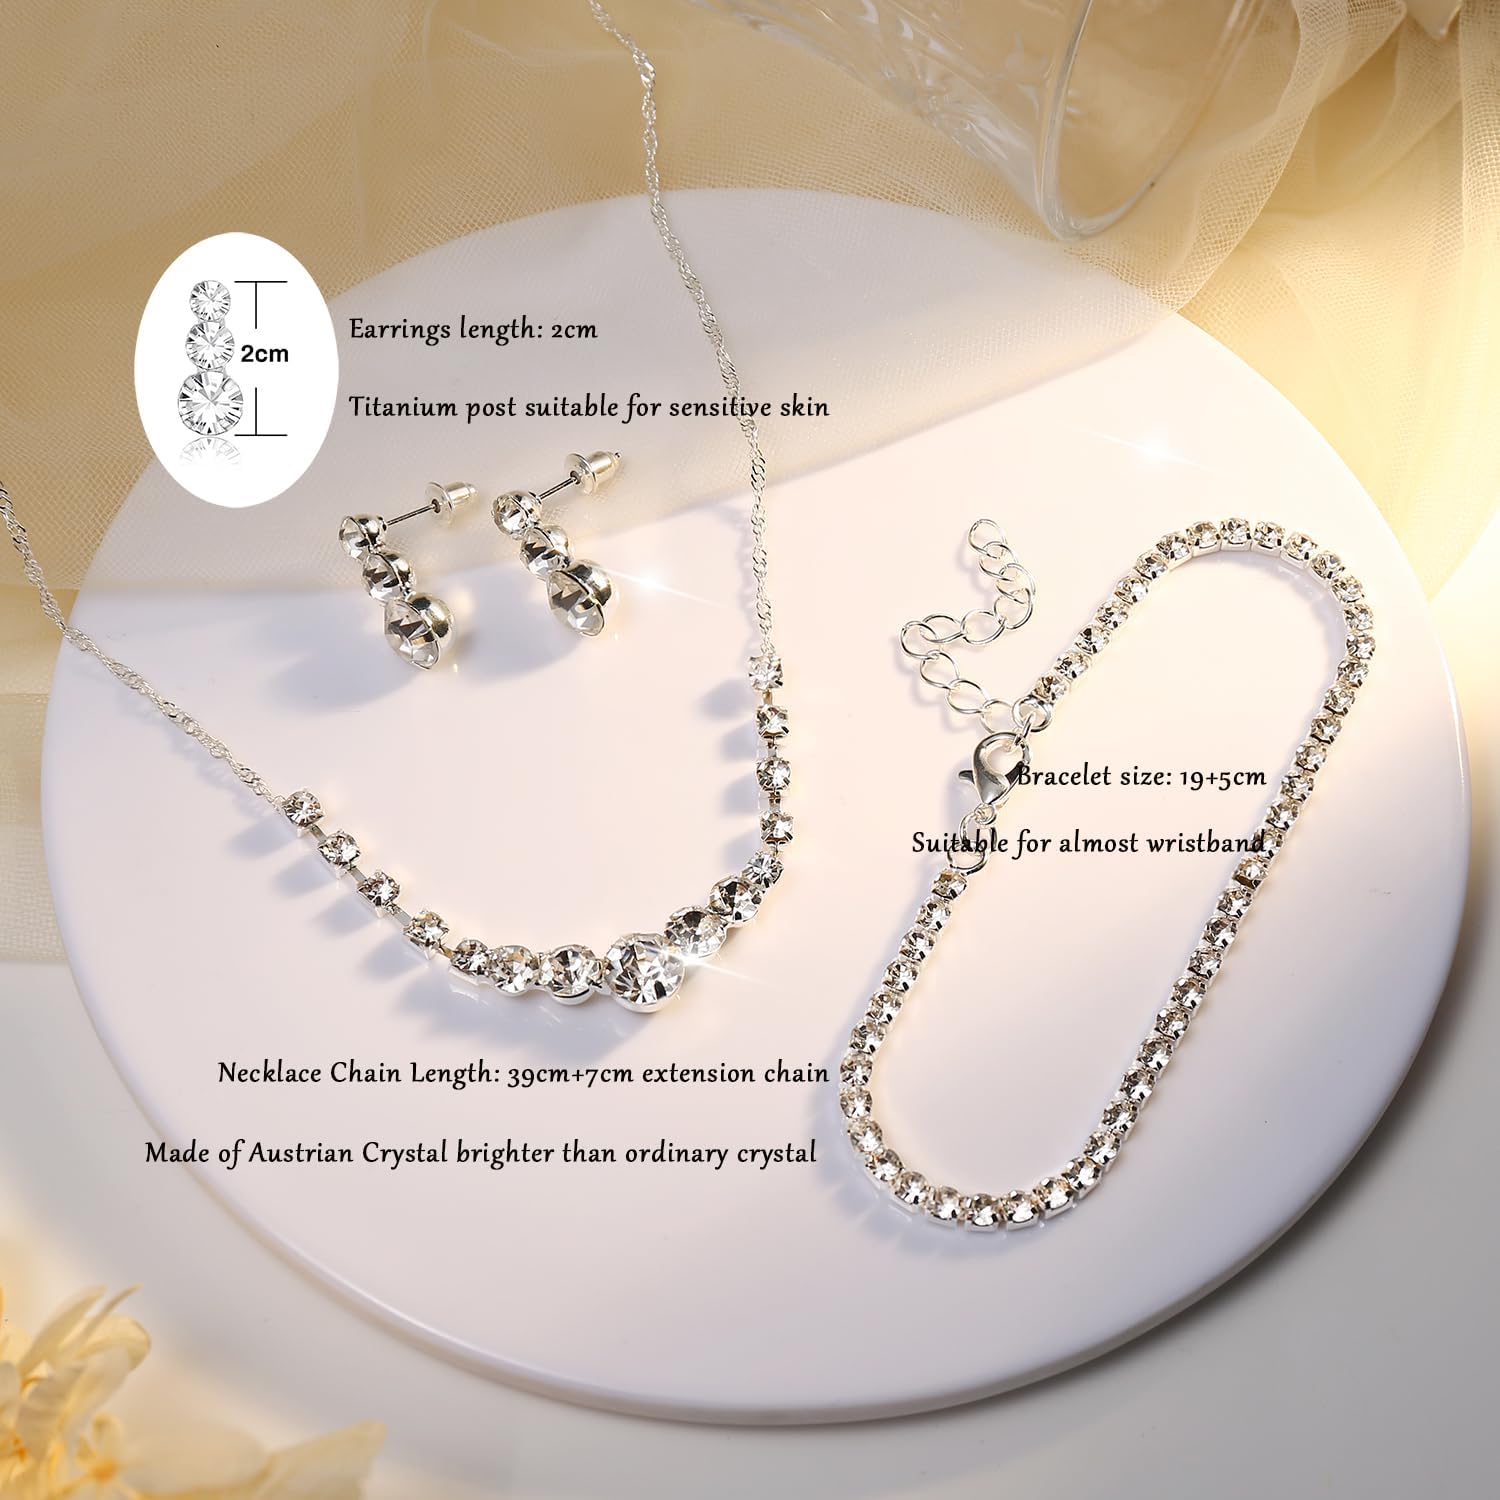 Jstyle Silver Jewelry Set for Women Rhinestone Crystal Necklace Drop Earrings Link Bangle Bracelet Bridal Wedding Jewelry Sets for Brides Bridemaid Prom Costume Accessories